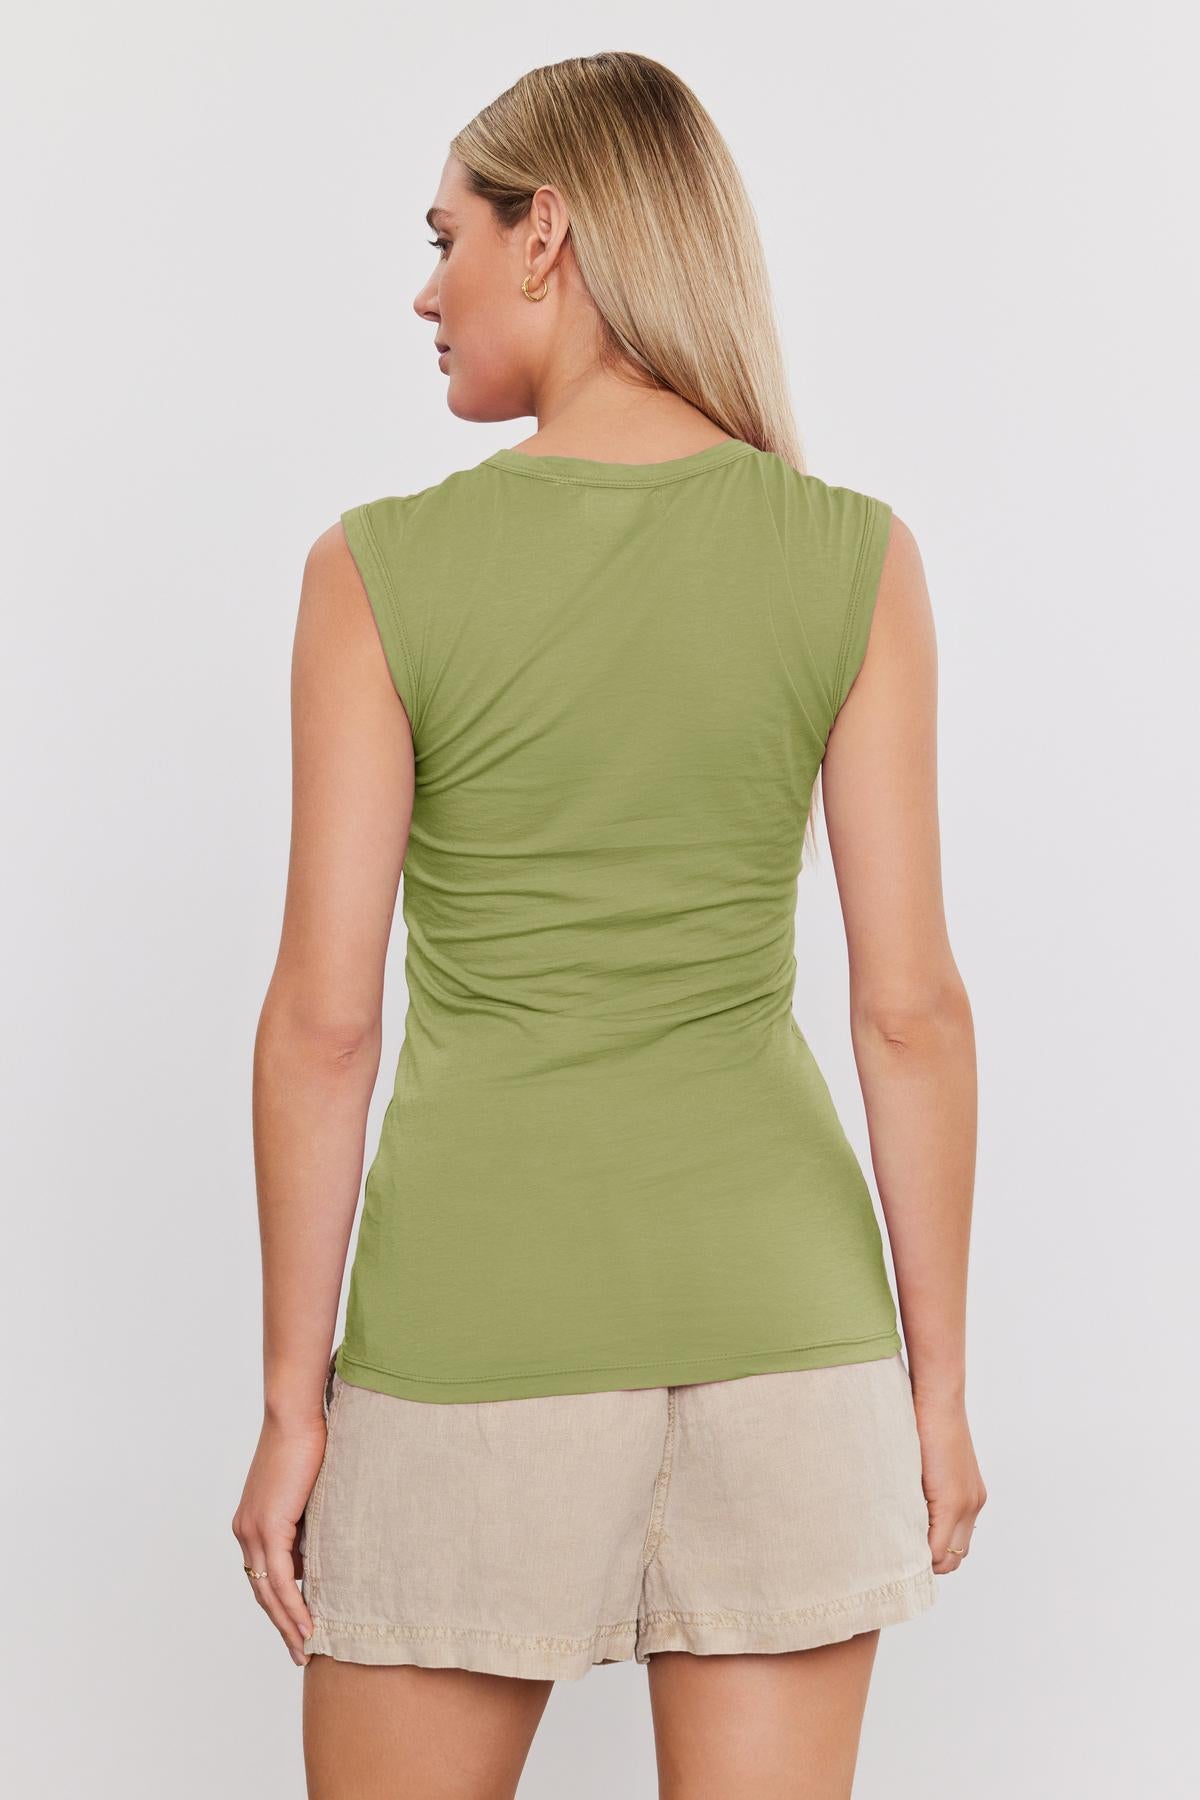 A person with long blonde hair is standing, facing away. They are wearing the ESTINA TANK TOP by Velvet by Graham & Spencer in green and beige shorts.-37104297967809